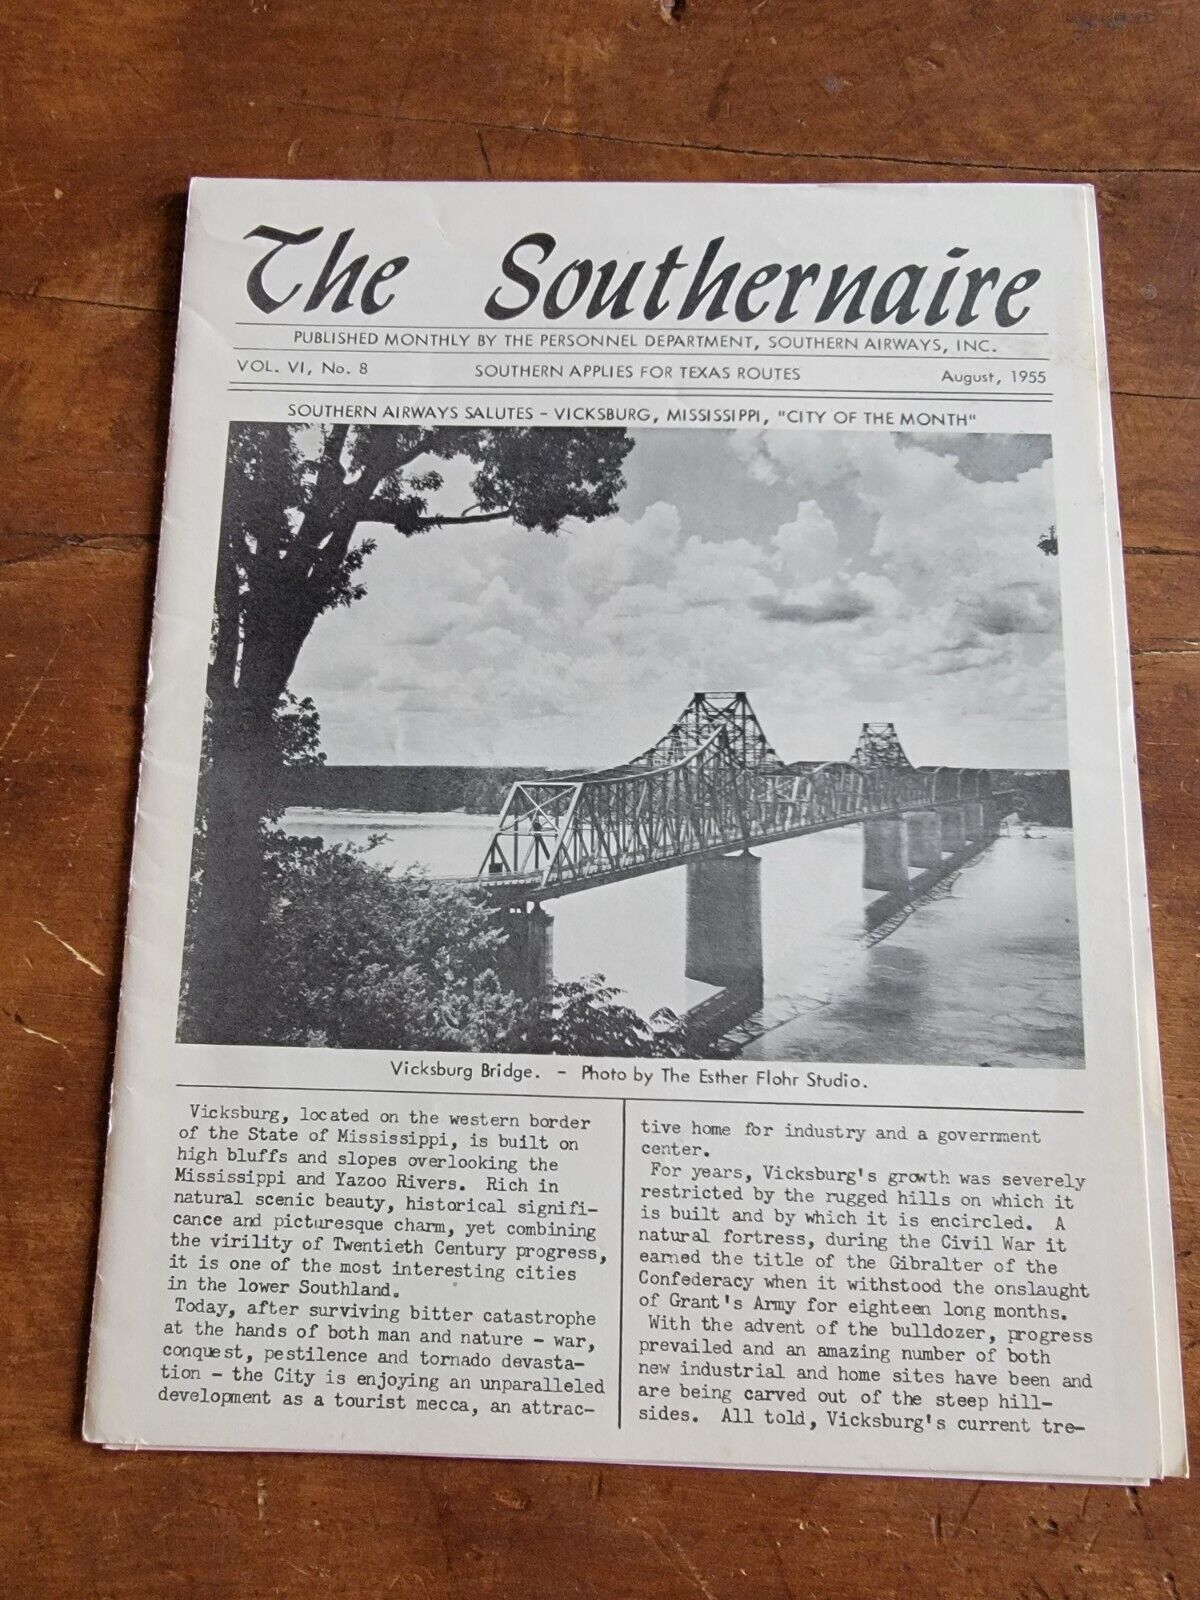 The Southernaire, Southern Airways VINTAGE 1955 Company Newsletter